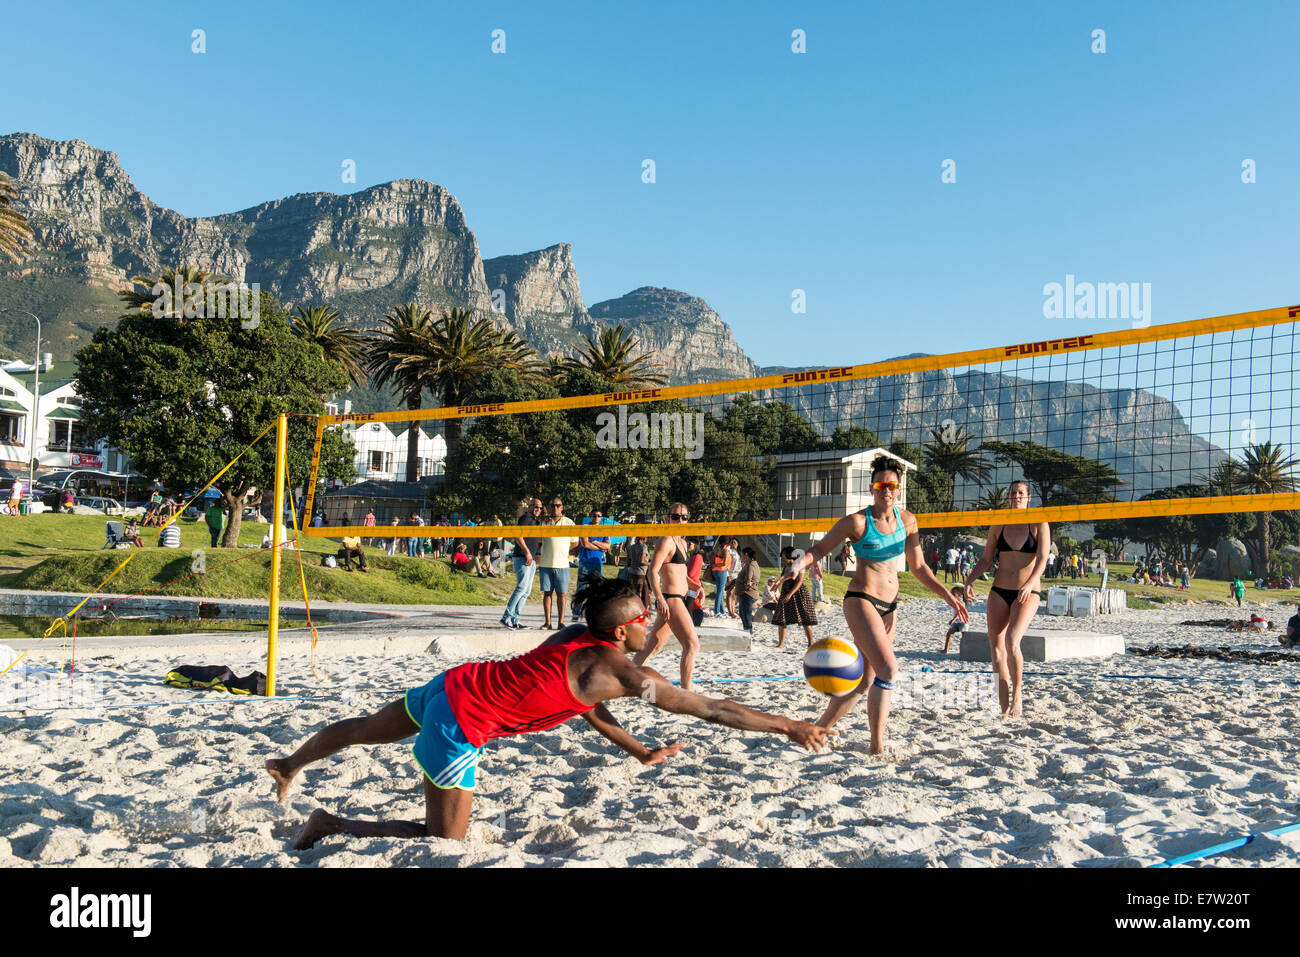 Beach volleyball players on the beach of Camps Bay, Cape Town, South Africa Stock Photo